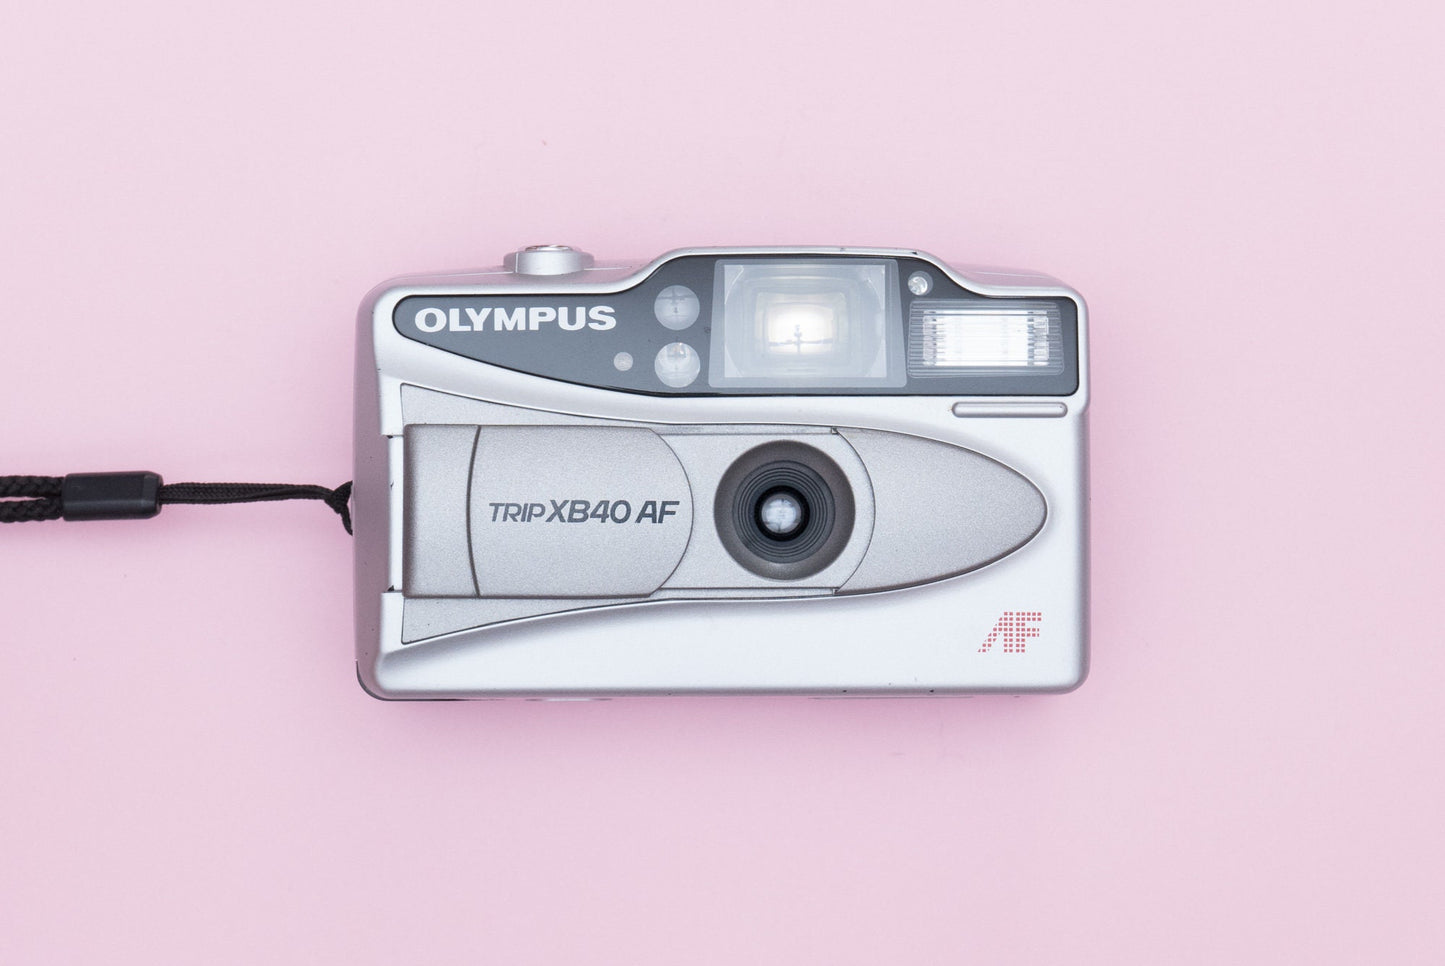 Olympus Trip XB 40 AF Compact 35mm Point and Shoot Film Camera